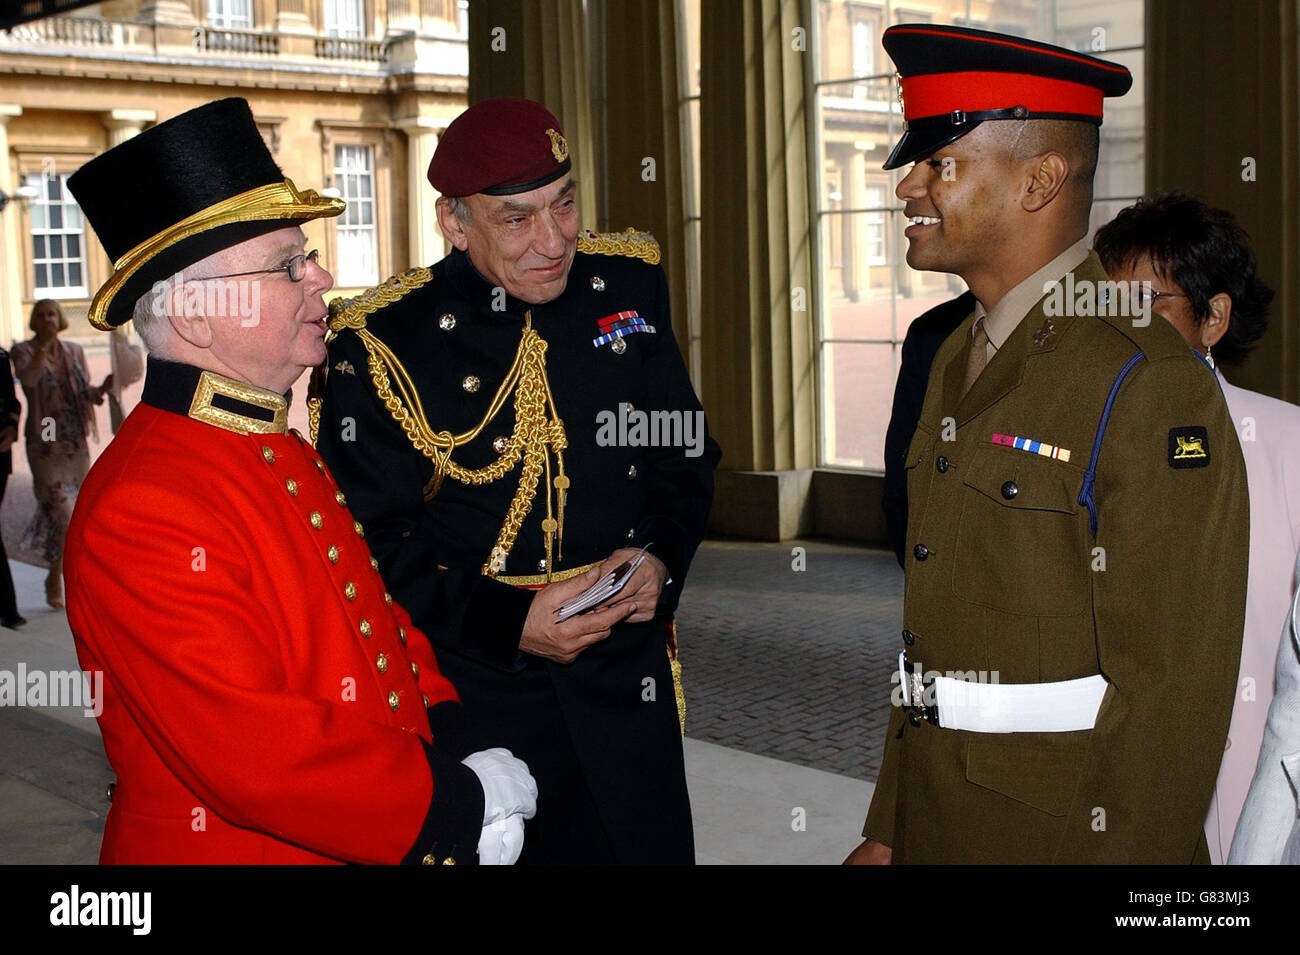 Iraq war hero Johnson Beharry (right) is met by a state porter and General Sir Mike Jackson (centre). Stock Photo